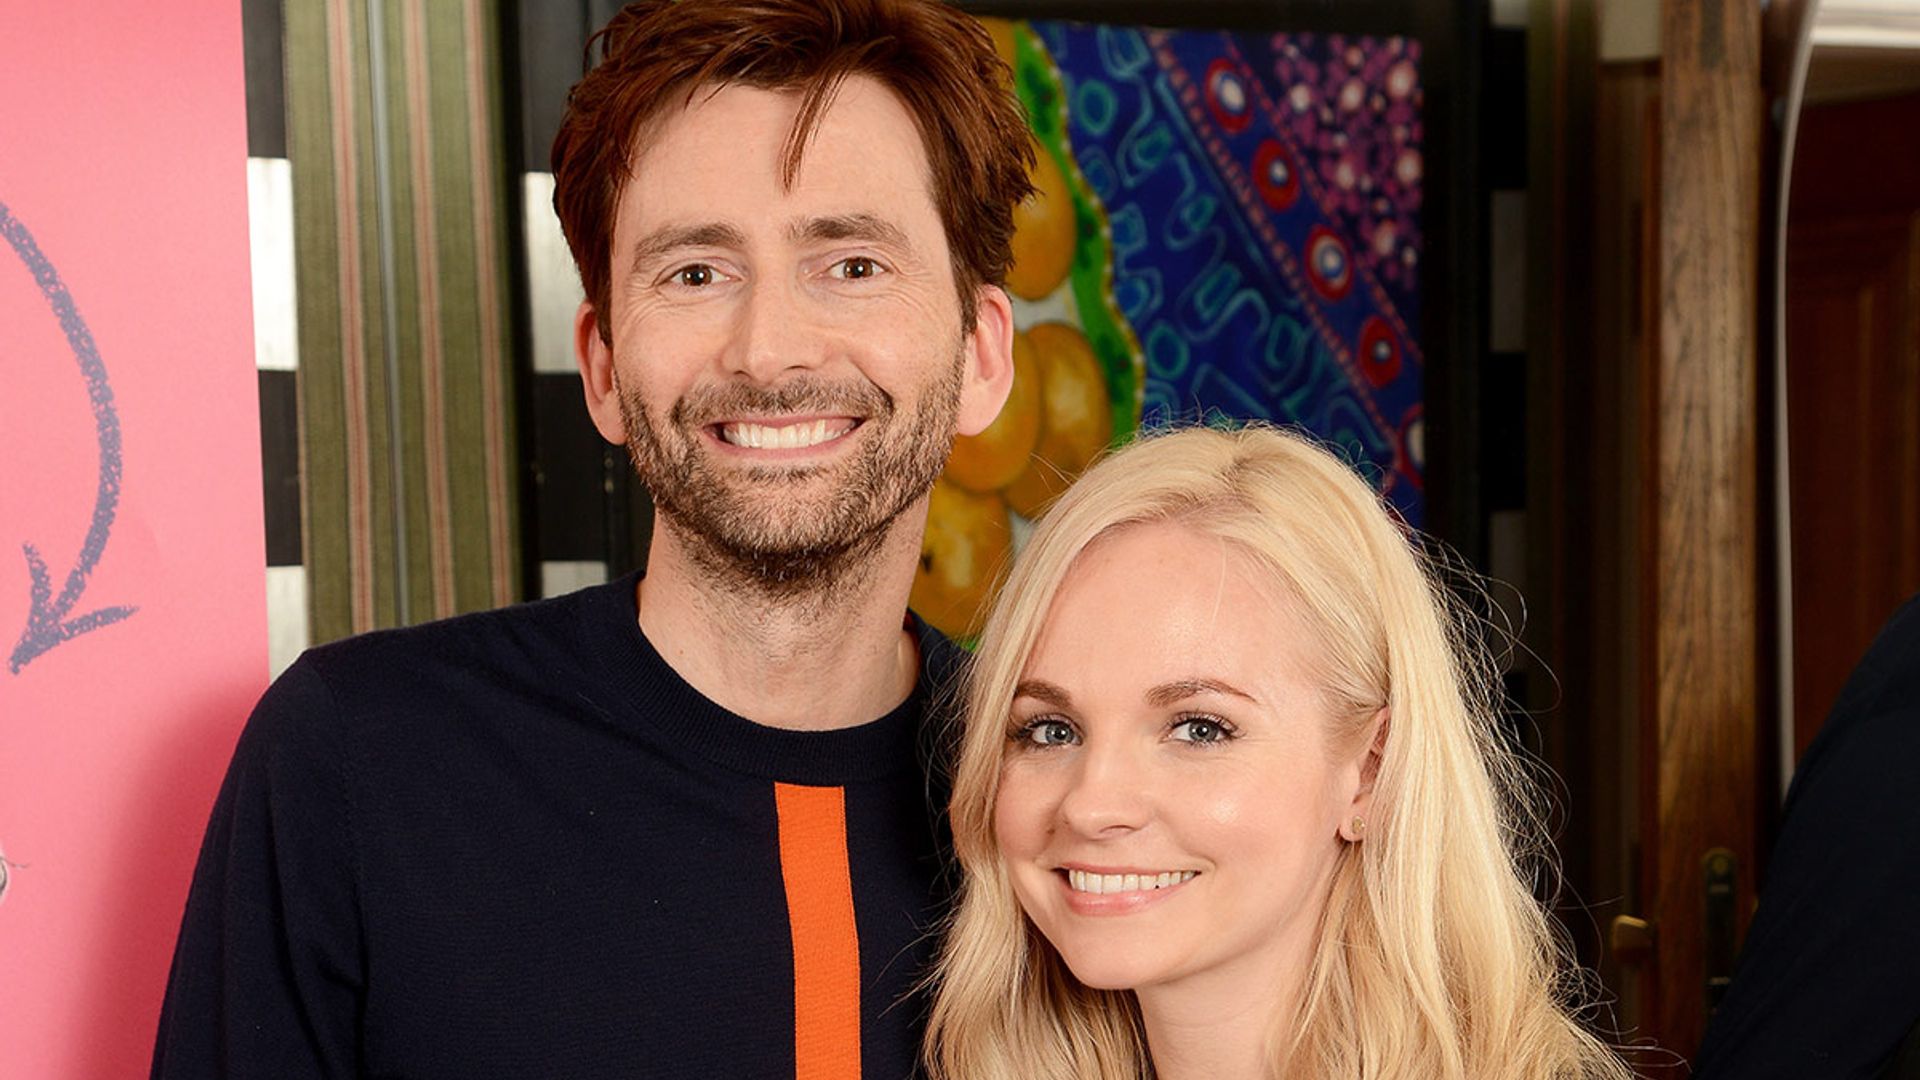 David Tennant's daughter showcases artistic skills with epic makeover